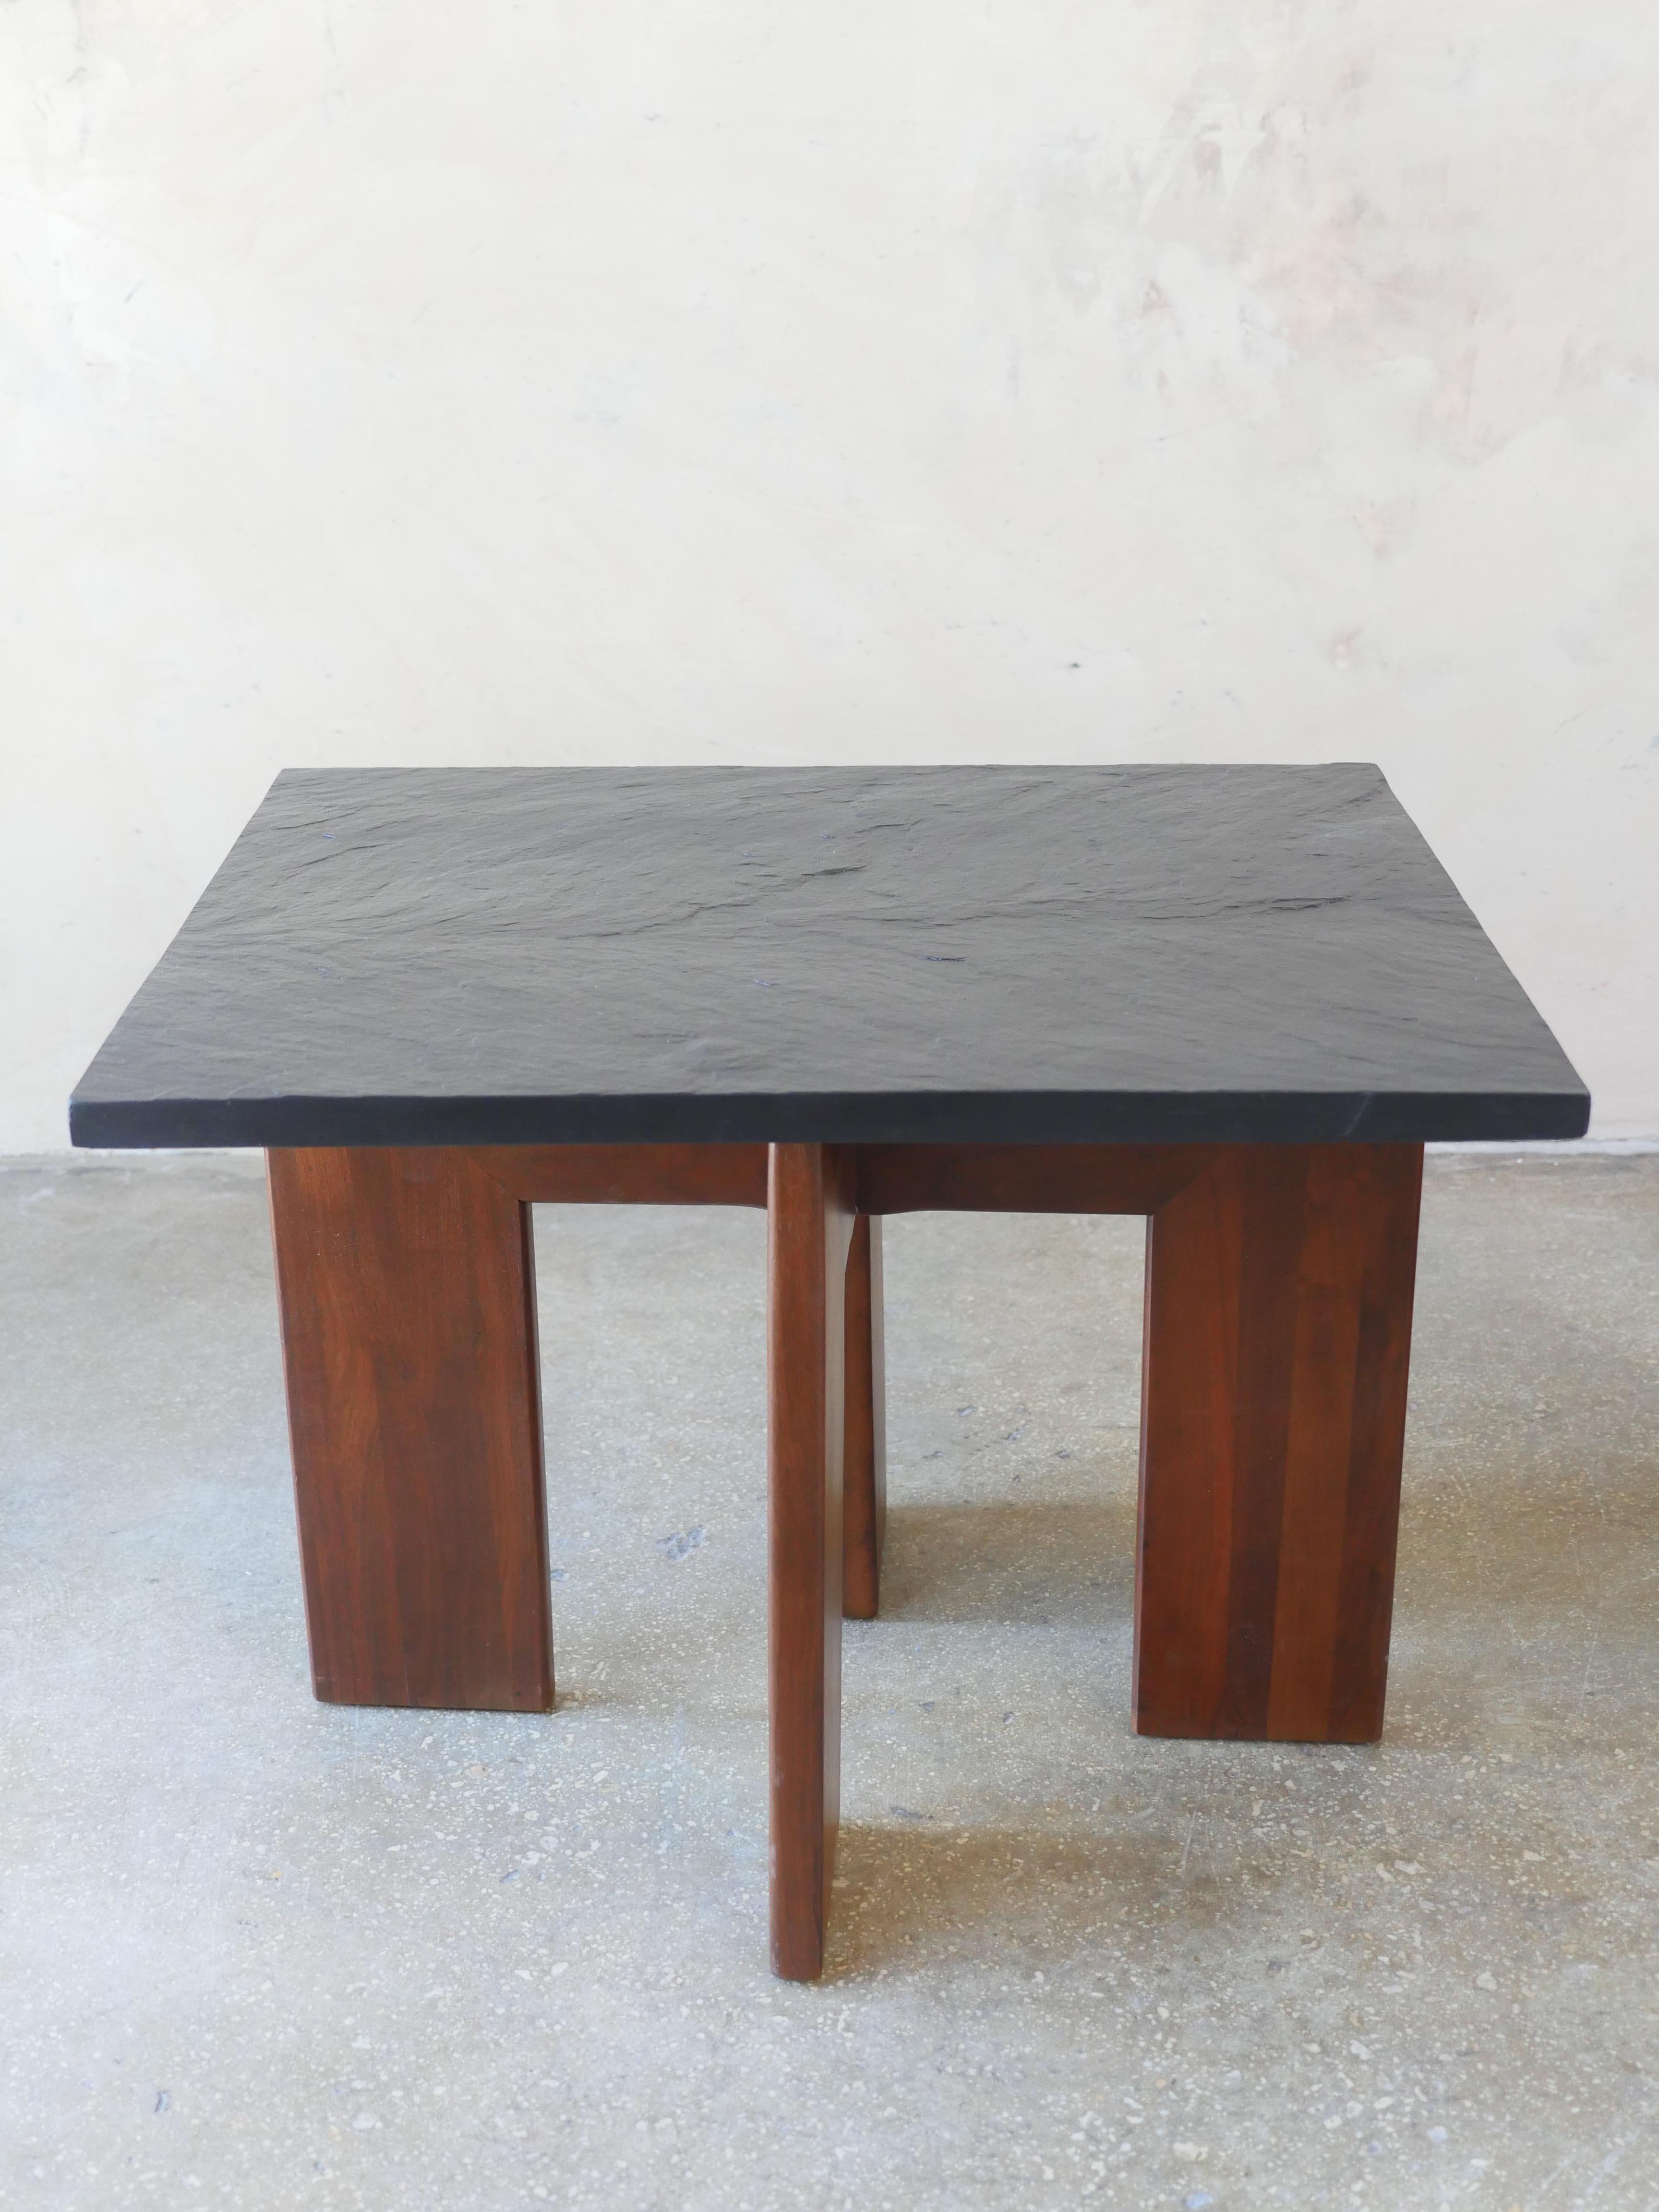 1960s Pair of sleek, walnut and slate, Mid-Century Modern side-tables designed by Adrian Pearsall. These signature side-tables, add a nice touch of vintage elegance to any space.